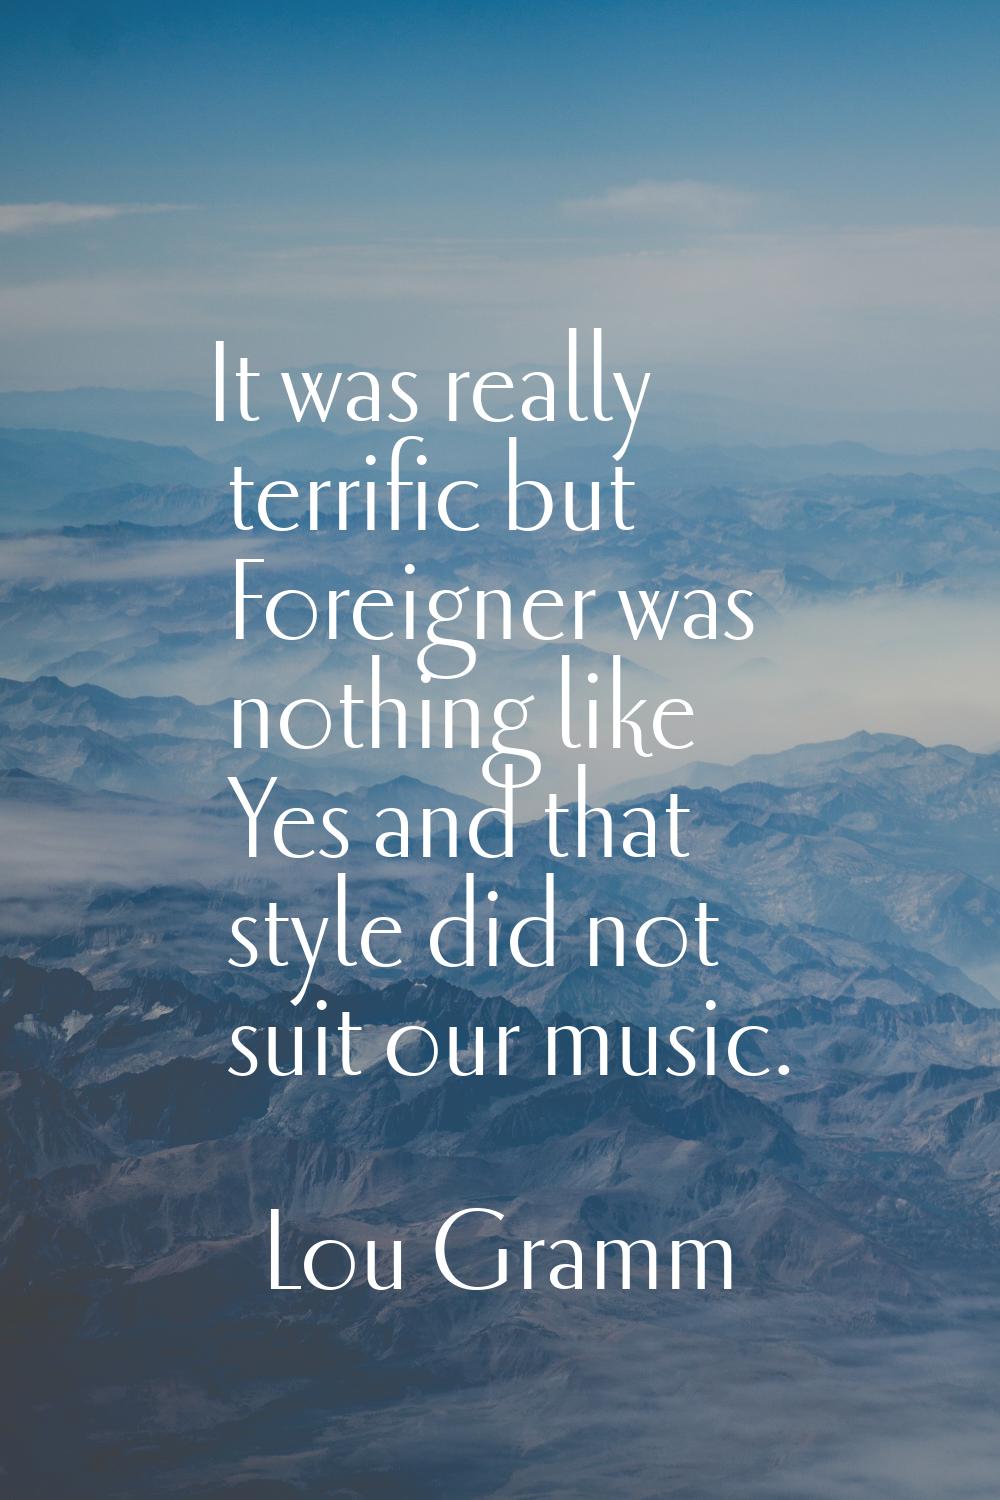 It was really terrific but Foreigner was nothing like Yes and that style did not suit our music.